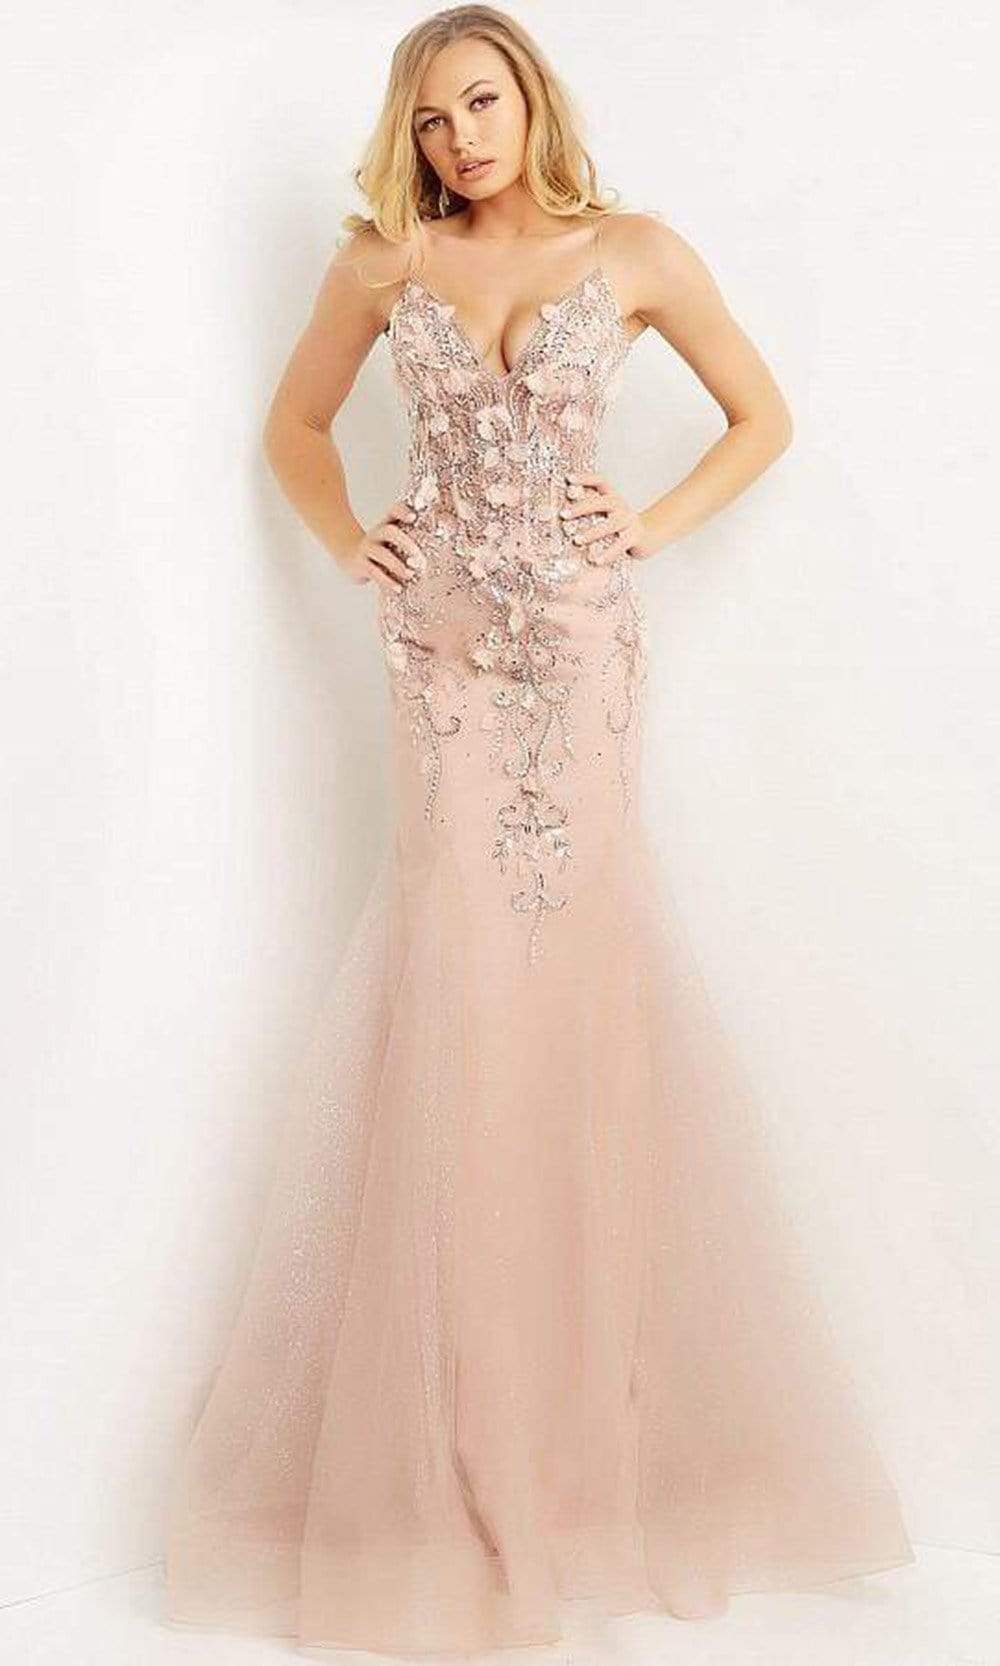 Image of Jovani - 05839 Beaded Floral Applique Corset Bodice Mermaid Gown